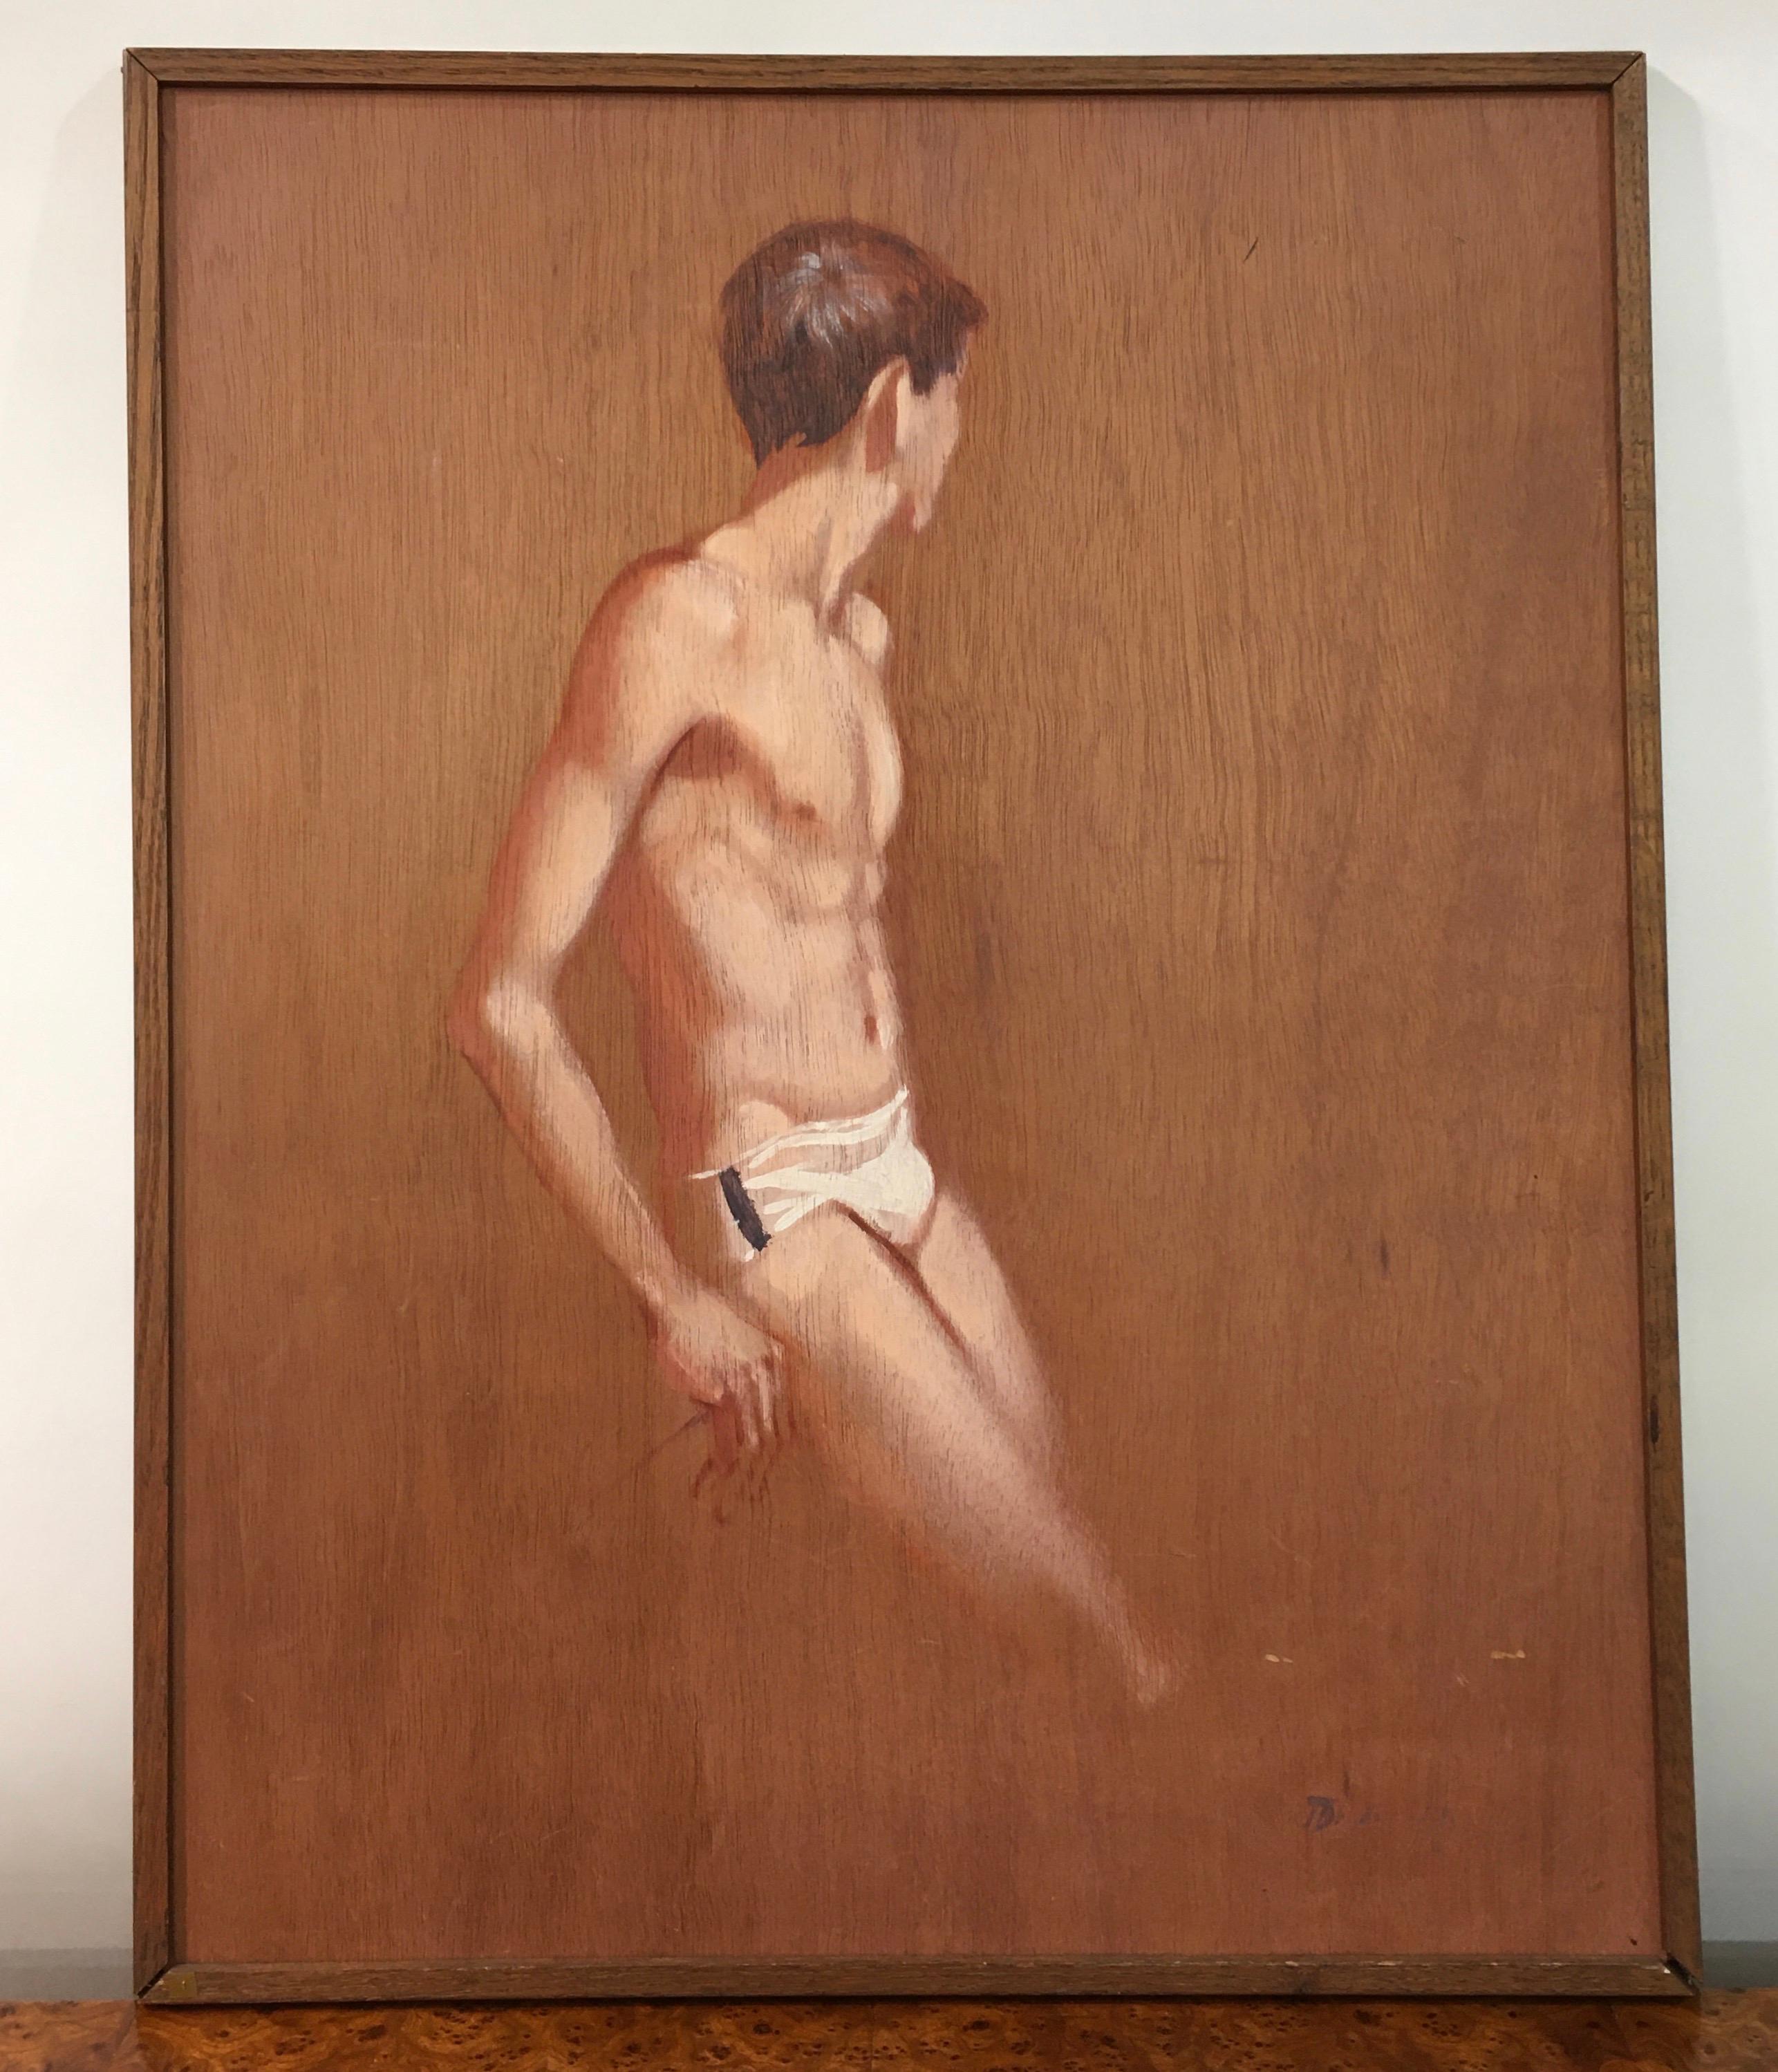 Figurative painting by Robert R. Bliss (1925-1981) of an idealized adolescent male model wearing a white briefs bathing suit. The painting is oil on a sheet of wood luan. The board is set within a slim frame made of oak, the lower corners of which